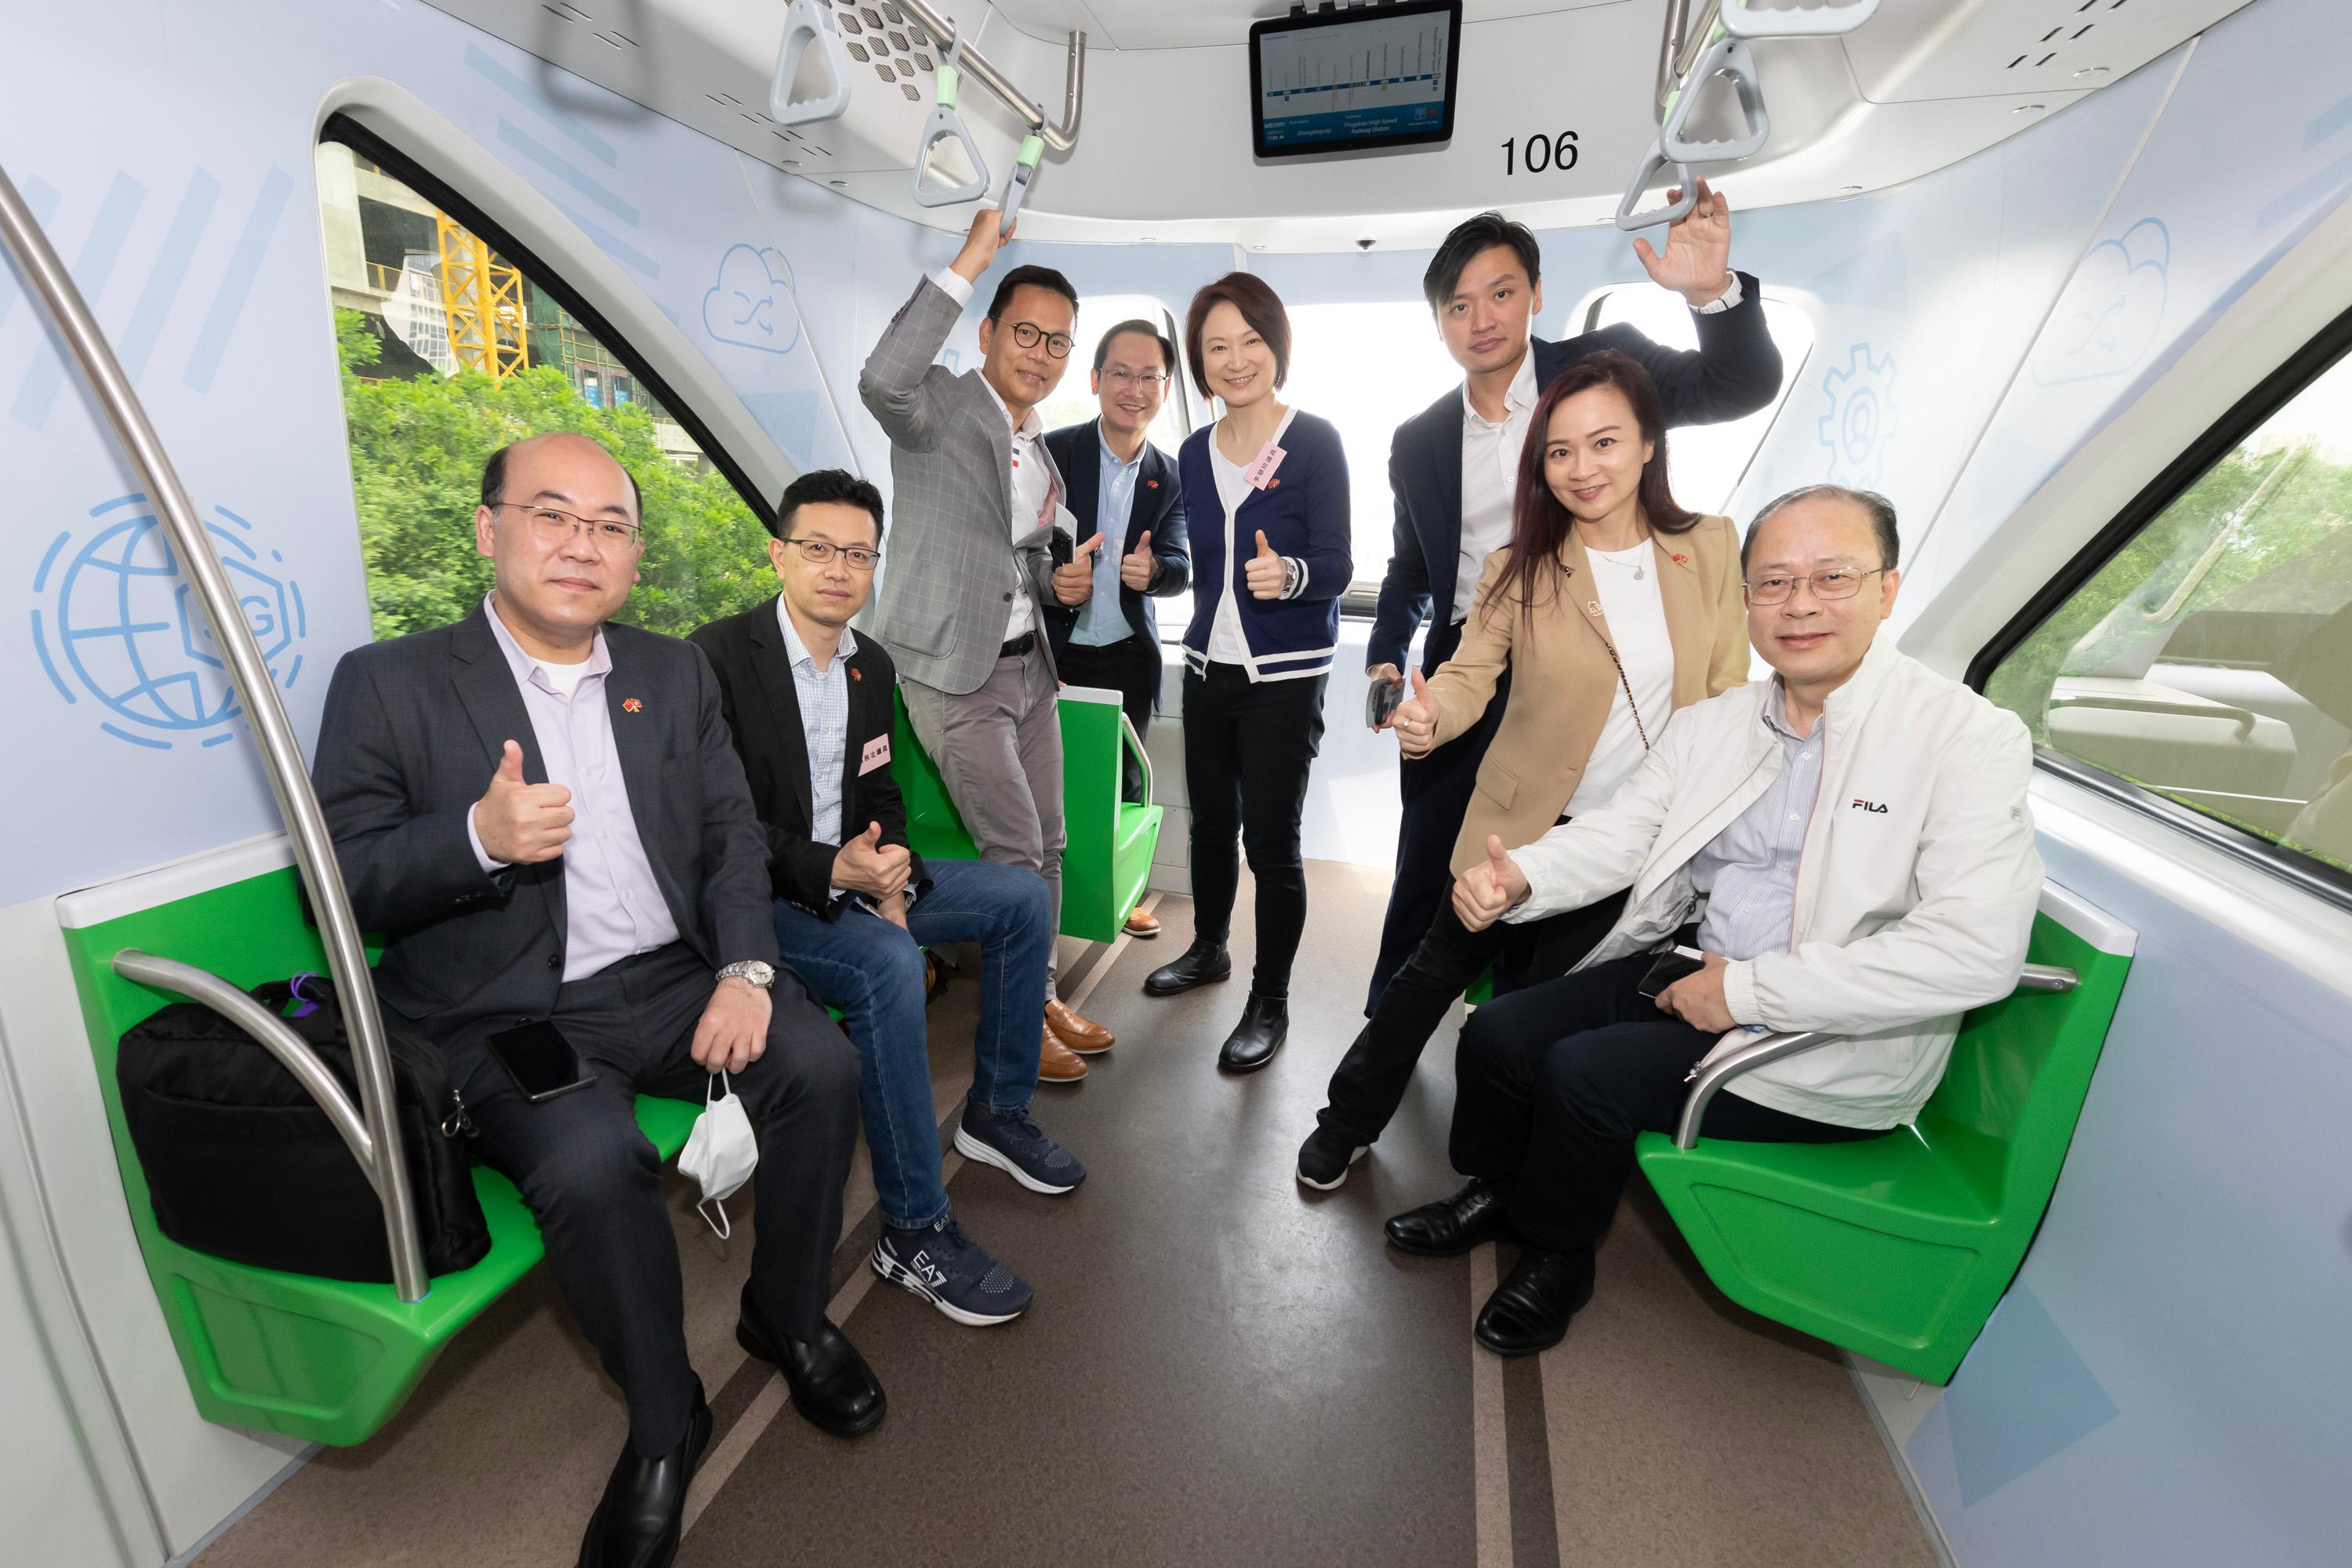 The delegation of the Hong Kong Special Administrative Region Government and the Legislative Council led by the Chief Executive, Mr John Lee, continues its duty visit in the Guangdong-Hong Kong-Macao Greater Bay Area today (April 22). The delegation experiences firsthand SkyShuttle, a new energy rail transit system developed by BYD Company Limited.